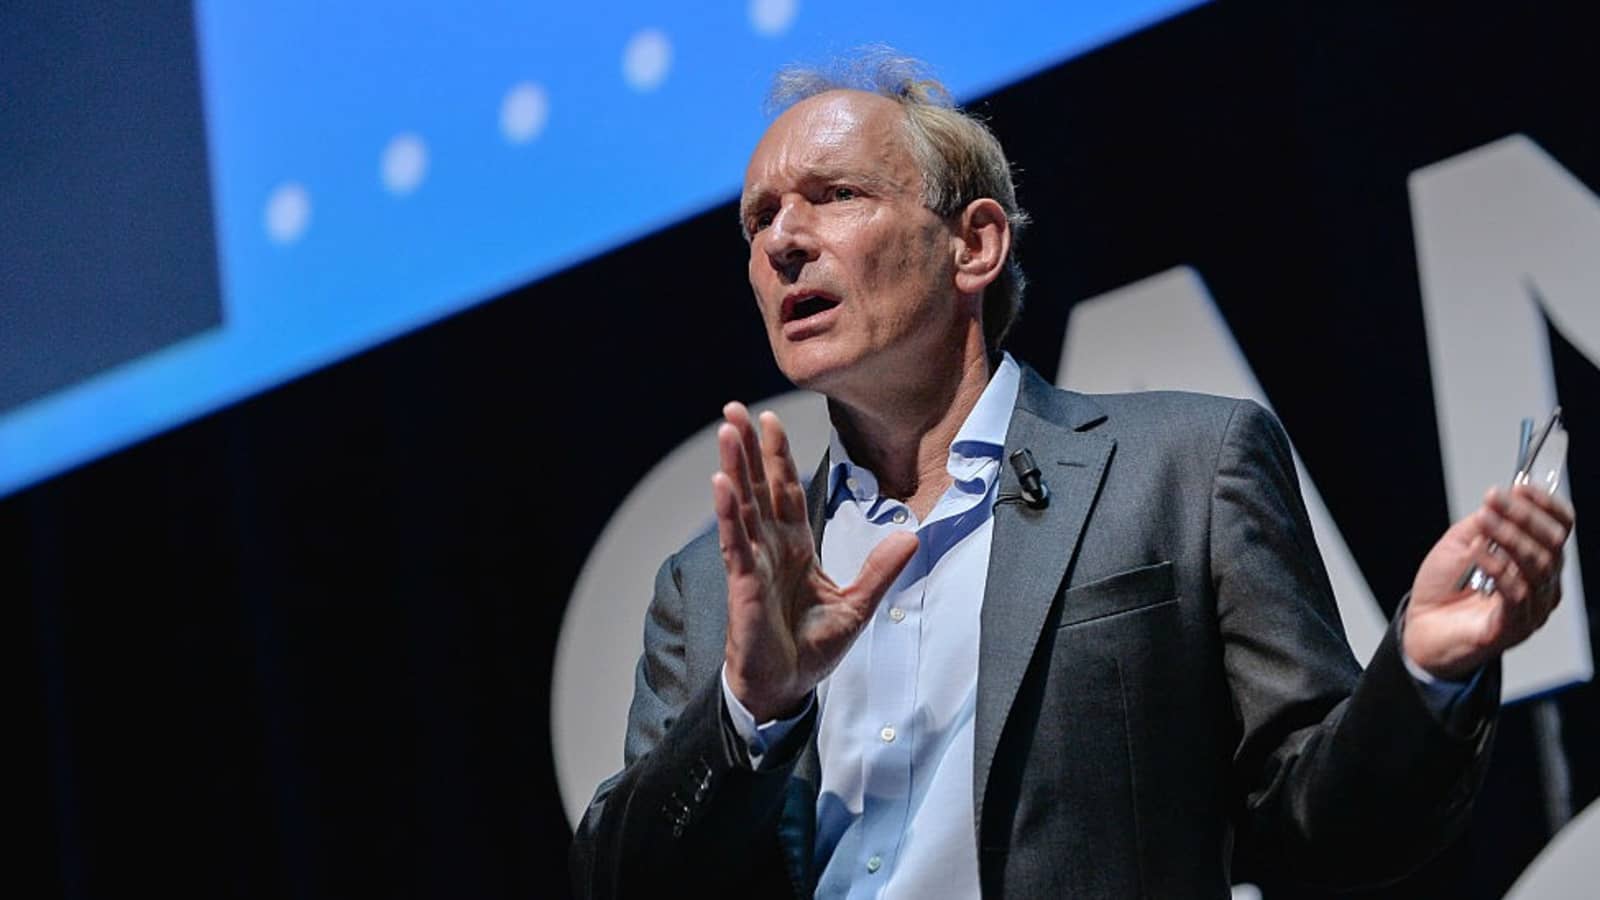 Tim Berners-Lee: We must tackle fake news for the benefit of all of humanity